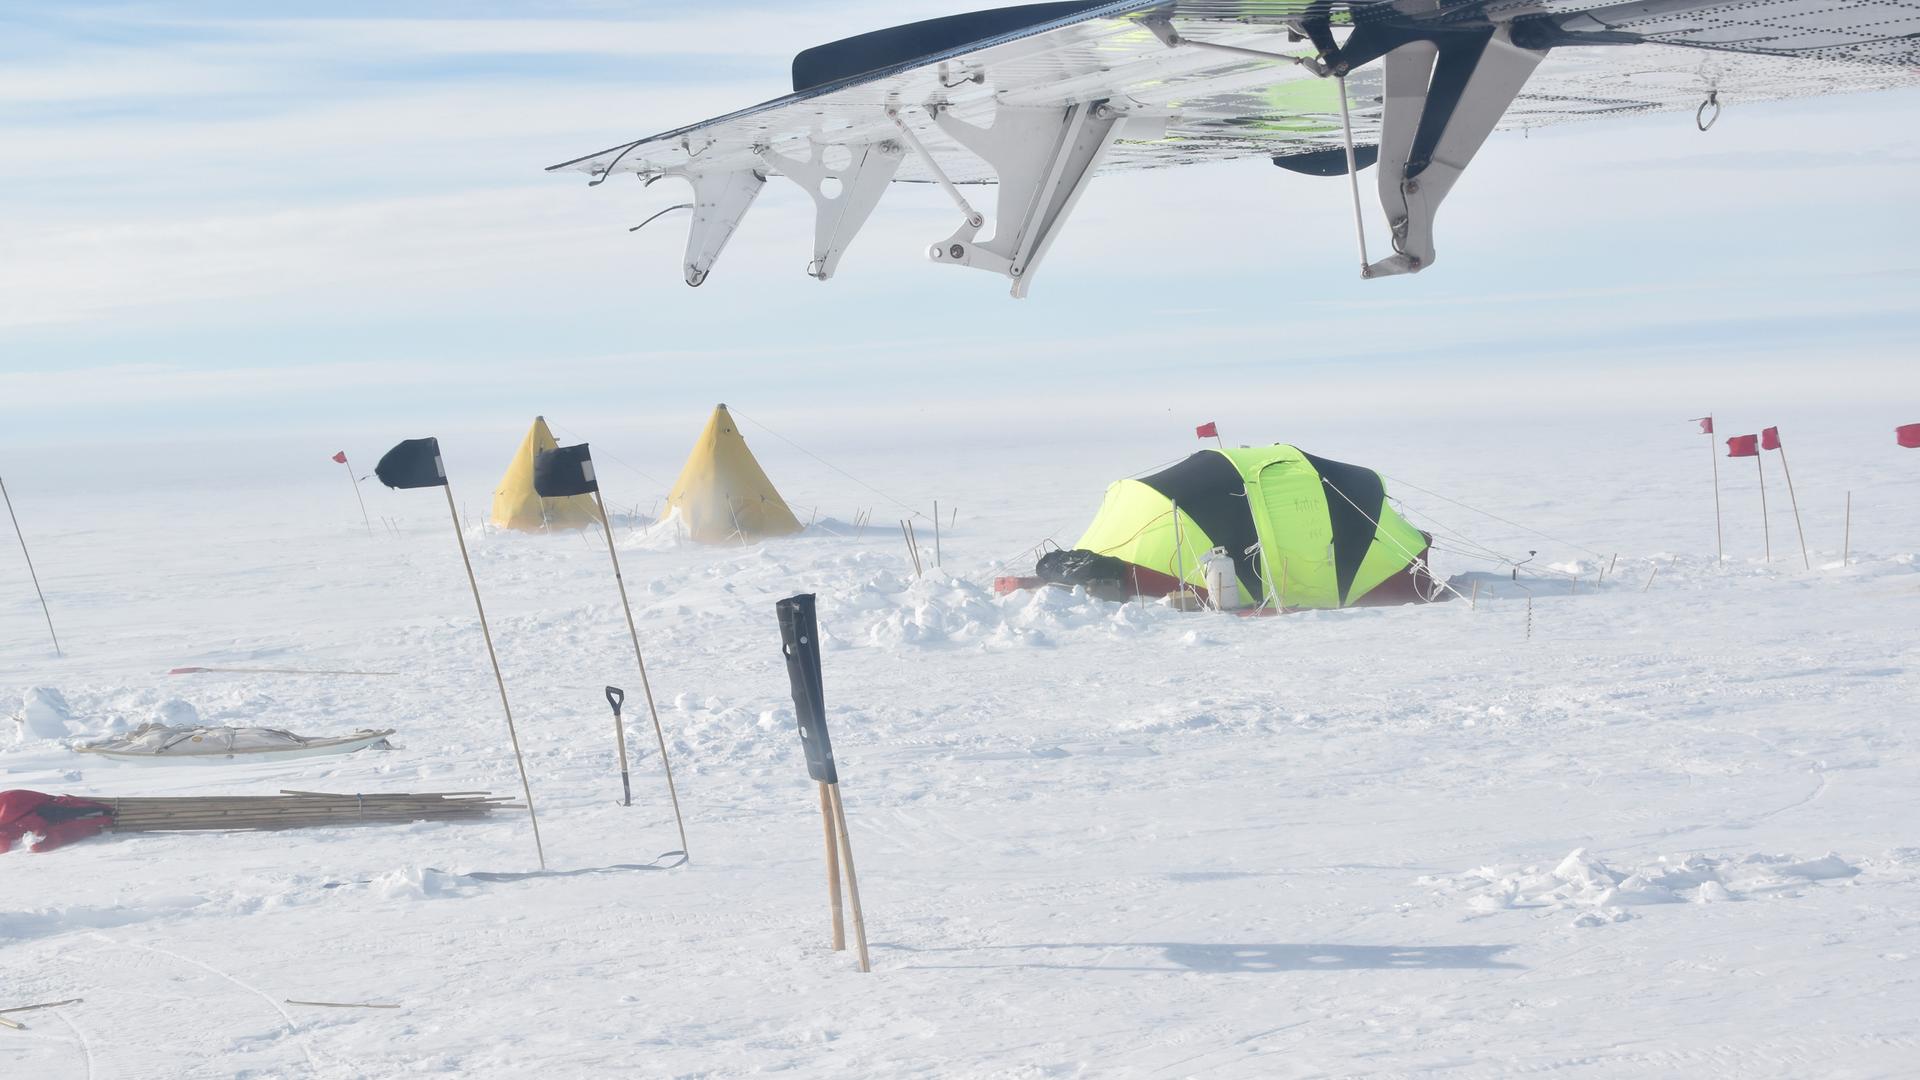 Two yellow tents and a larger dome tent are staked into the snow. At the top of the image is a wing of a tiny prop plane. 